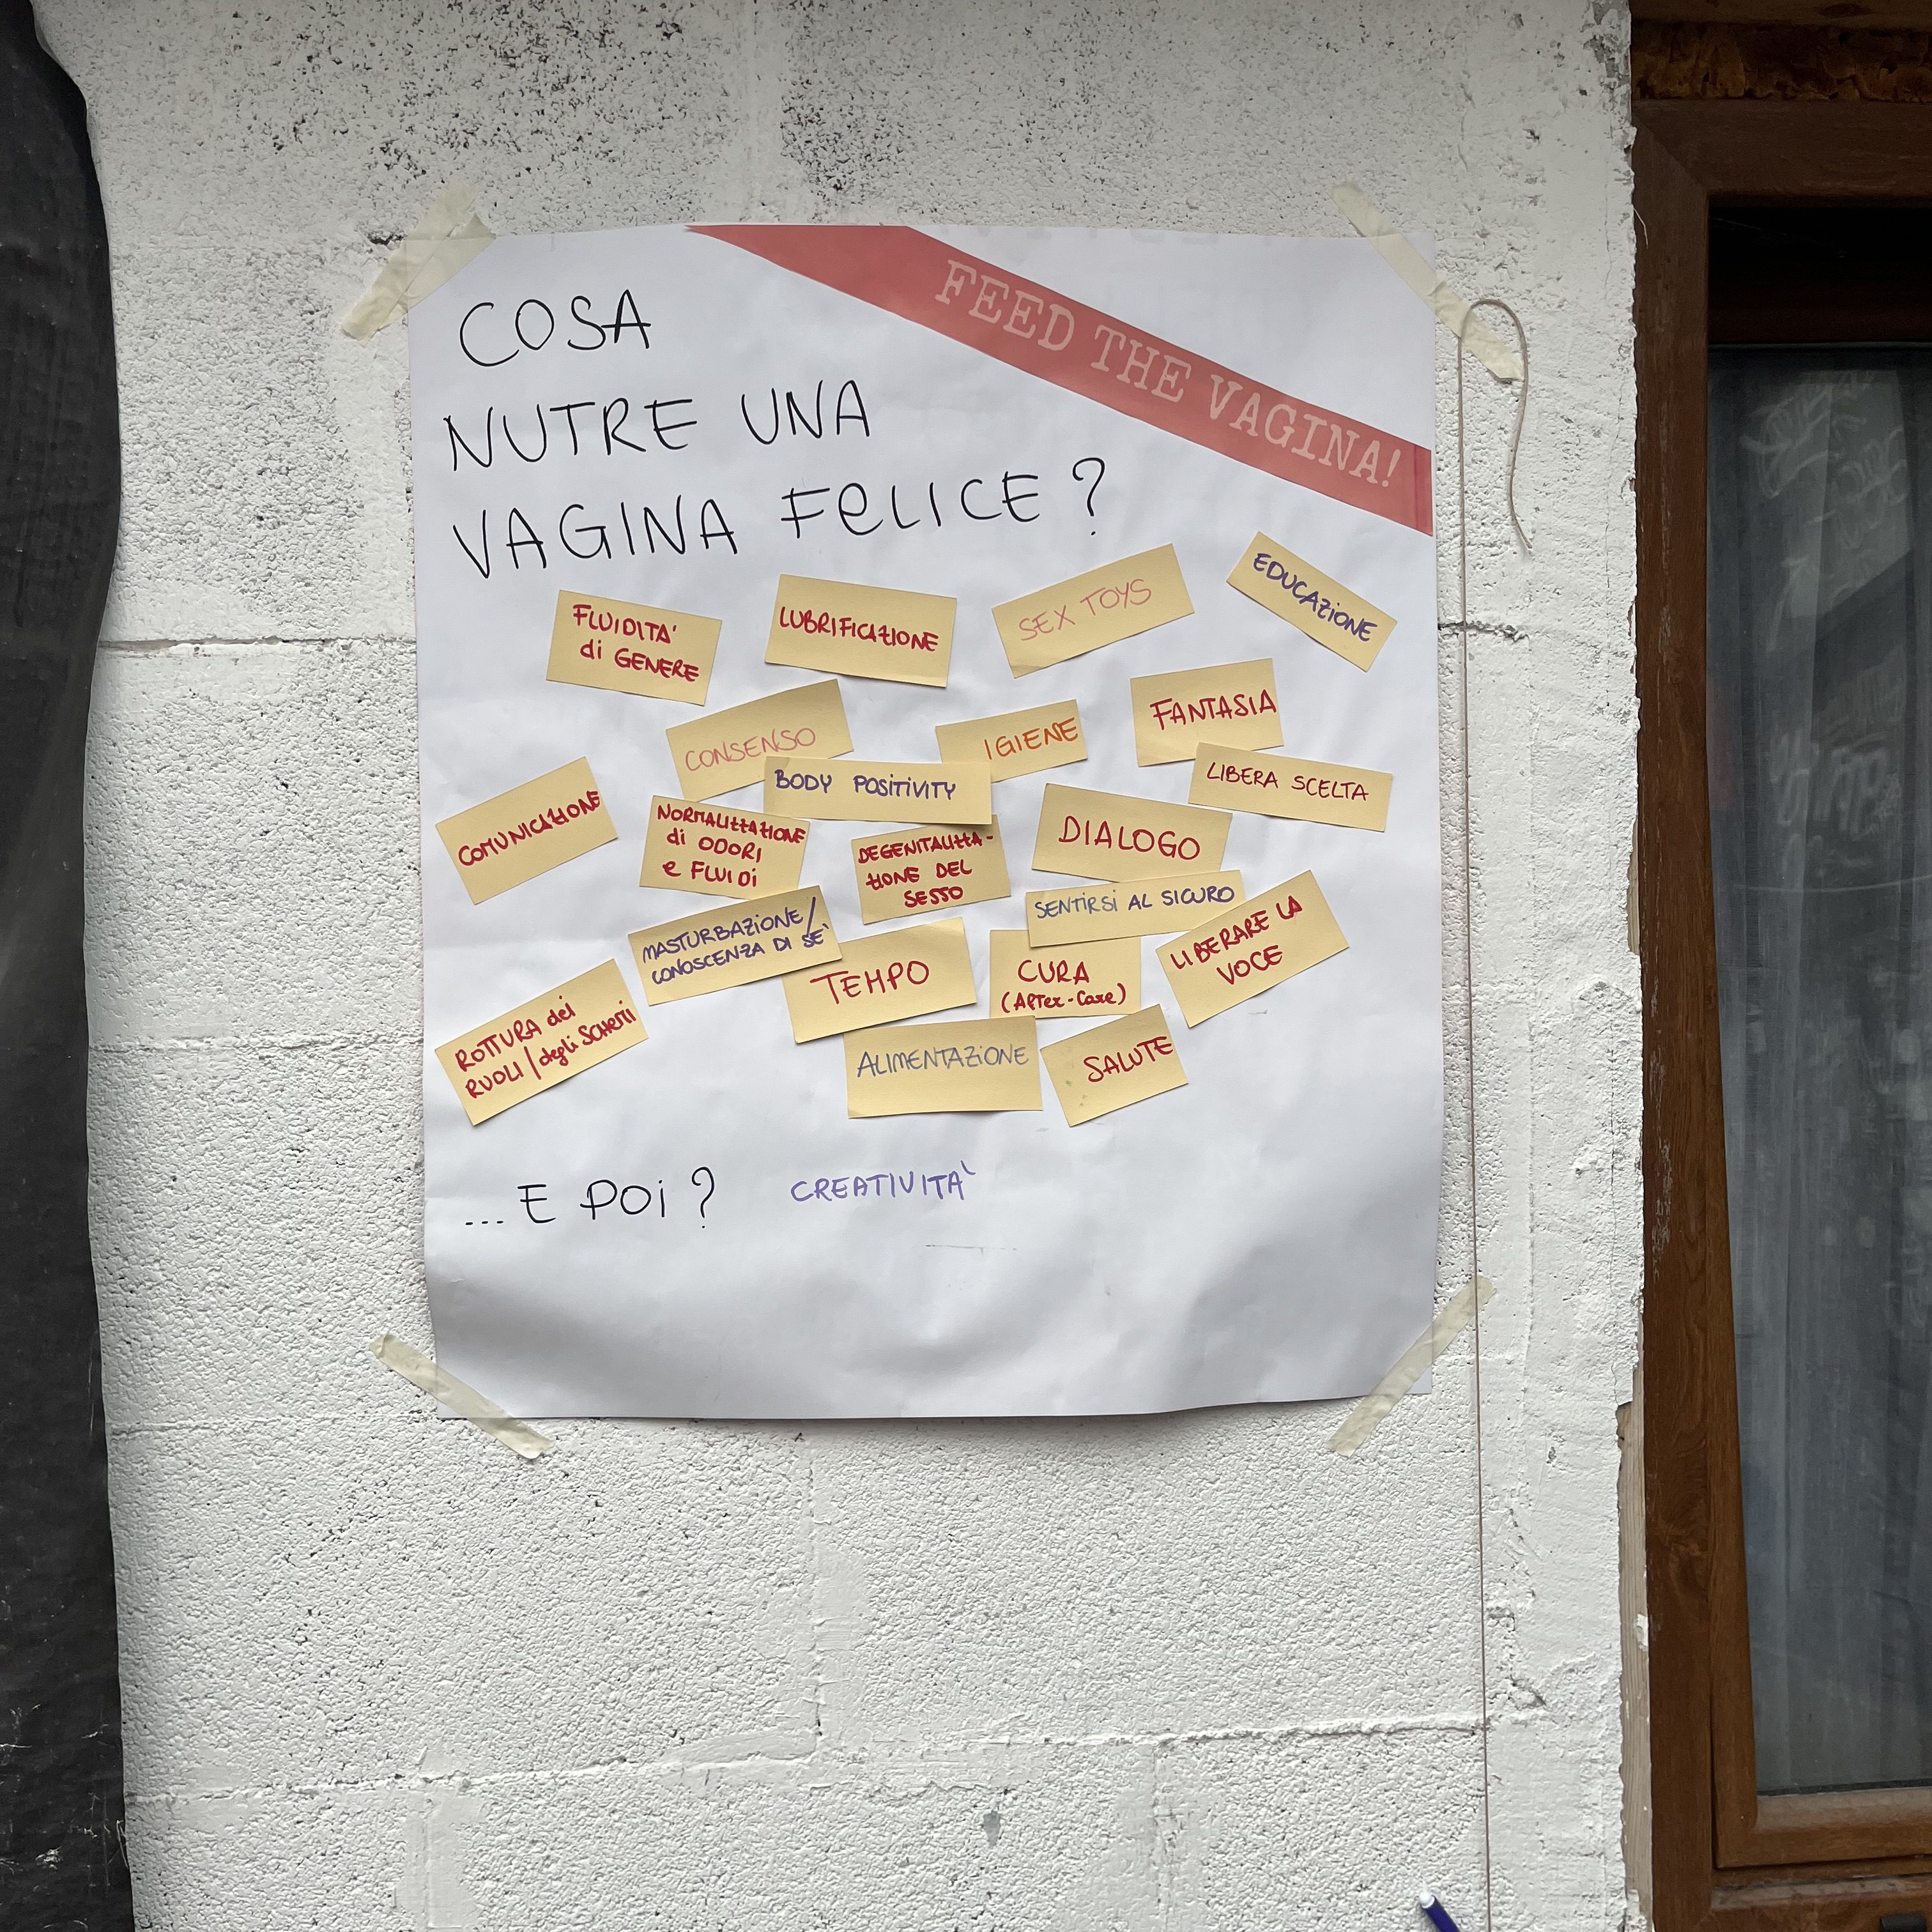 This photo shows a poster that was made during an earlier workshop. It is in italian, but roughly translated it asks what nurtures a happy vagina? People have placed sticky notes on the poster with various answers, such as lubrificcation, communication, body positivity, hygiene, care and free choice. 